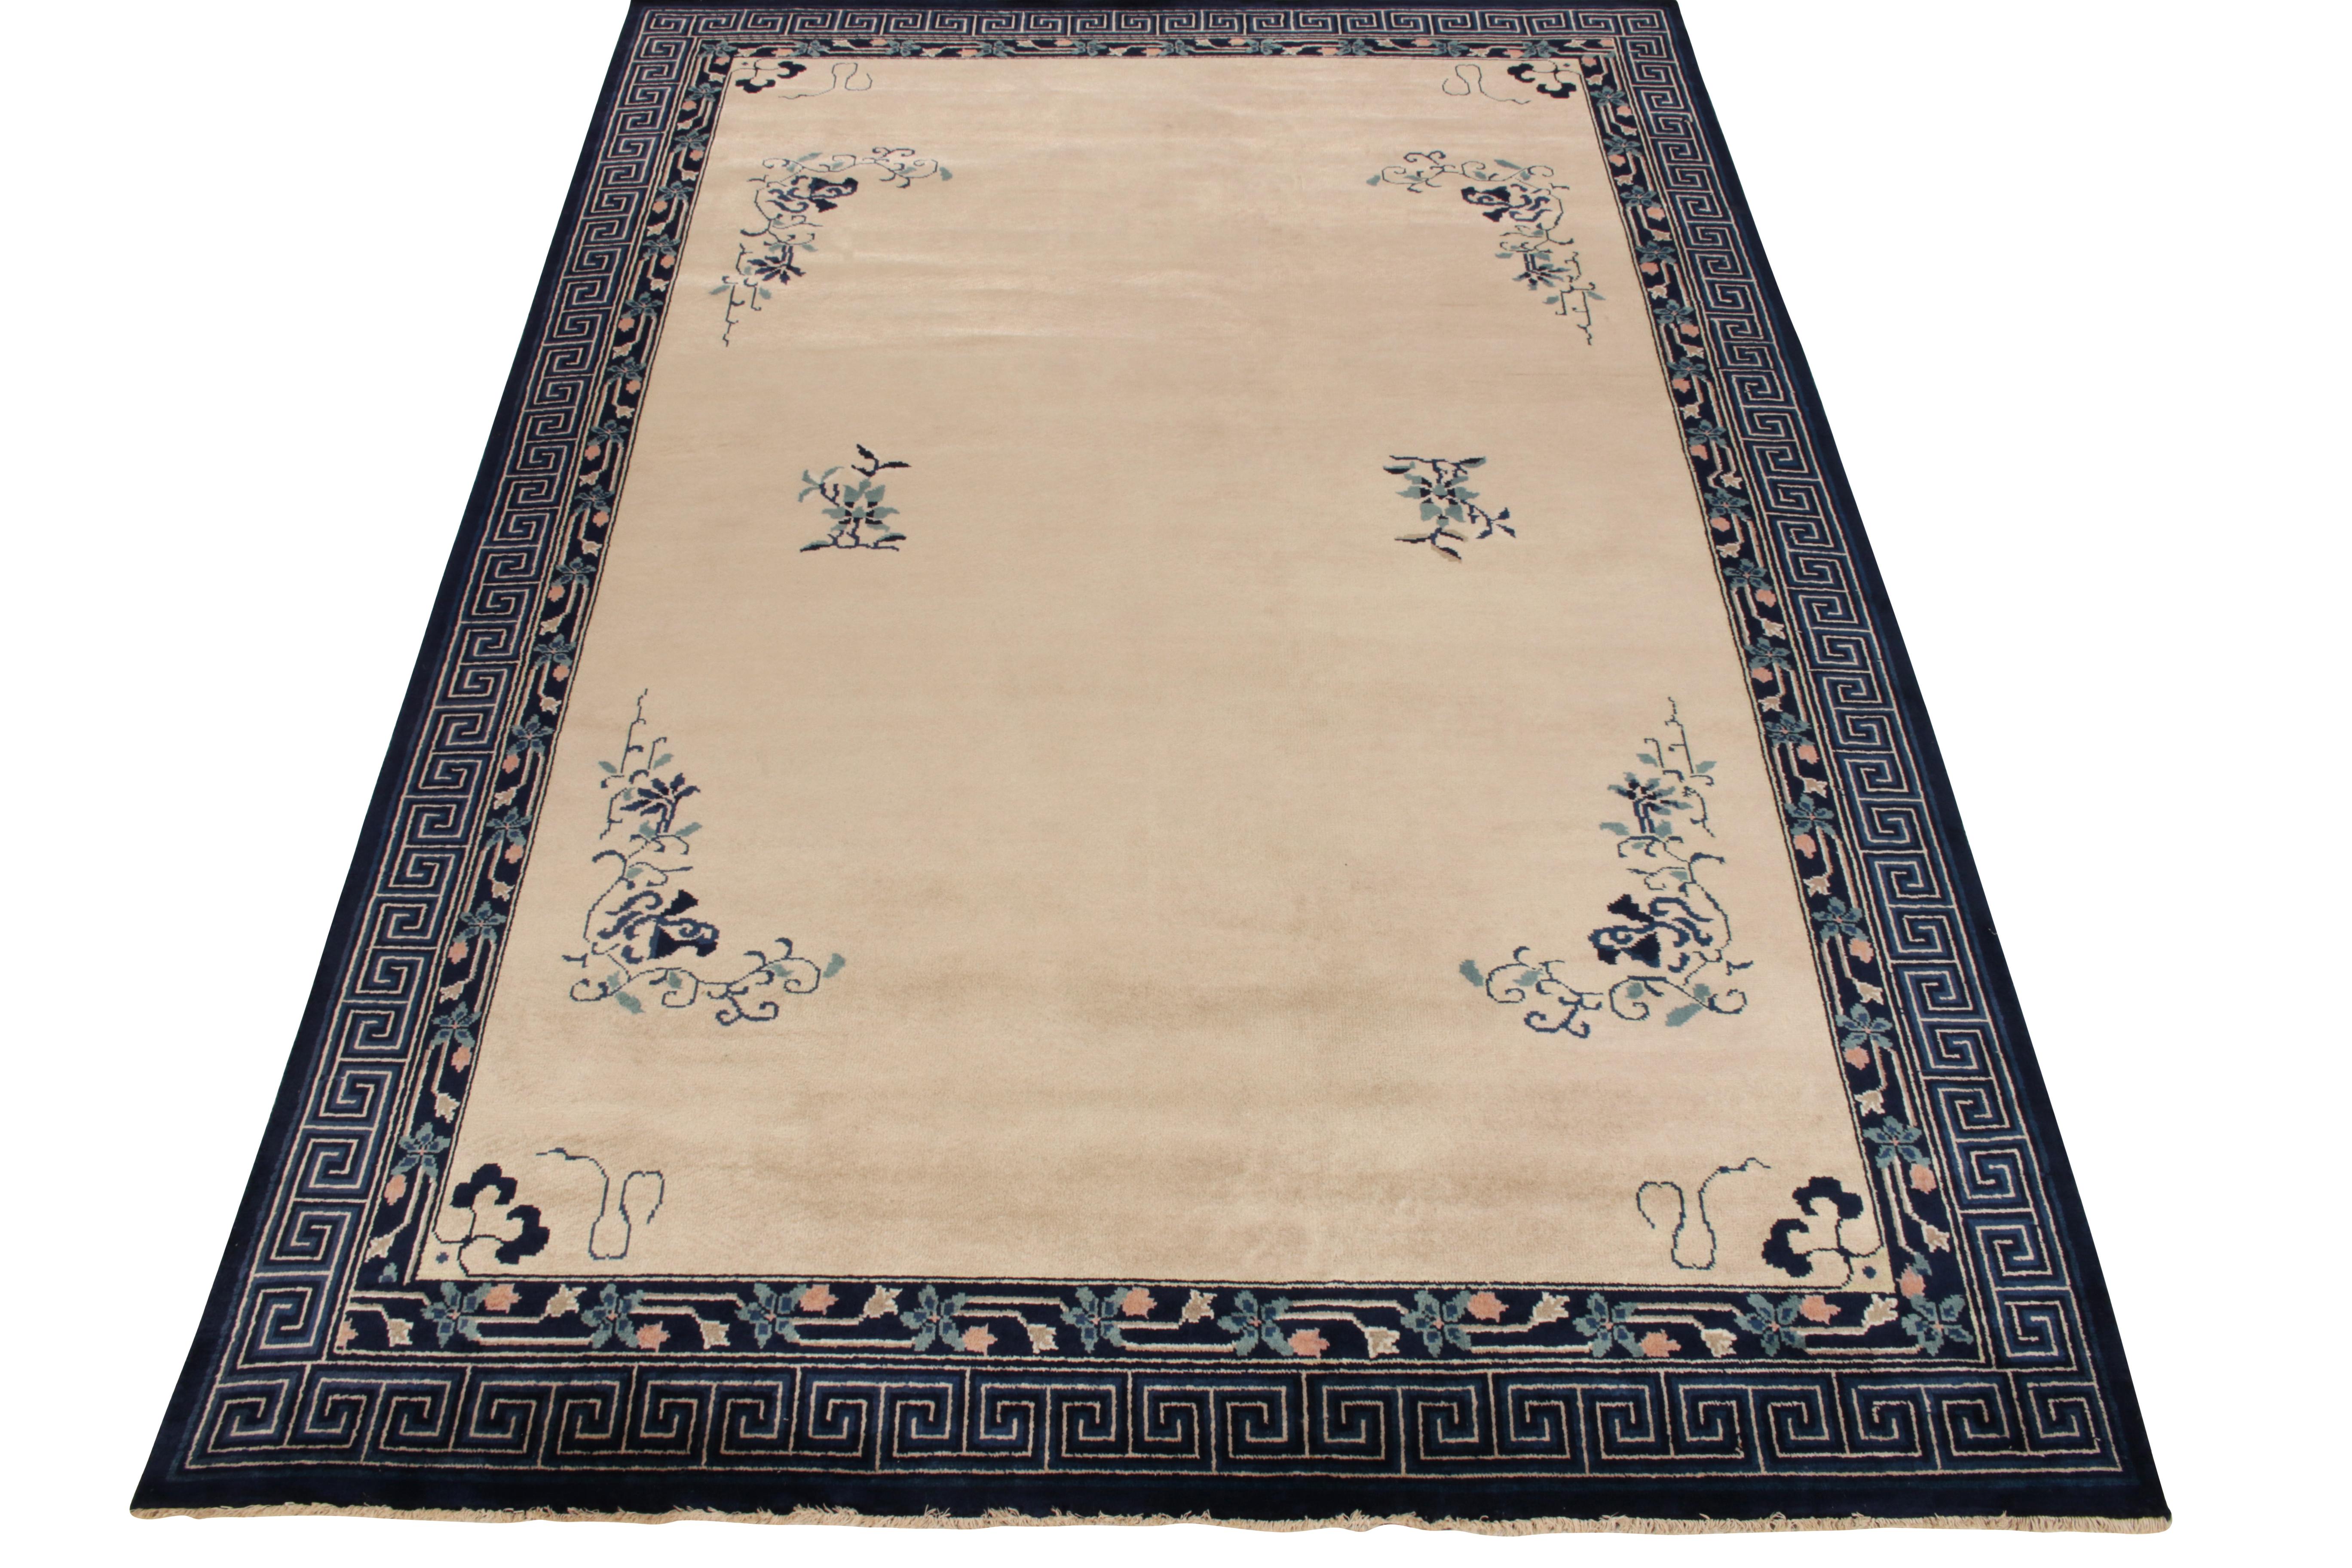 Encased in a Greek key border & floral designs in deep blue, beige & peach, this 1920s style rug enjoys Chinese Art Deco inspiration, connoting a distinctive vintage line newly unveiled from our Deco patterns. Mild light and dark spots on a biscuit